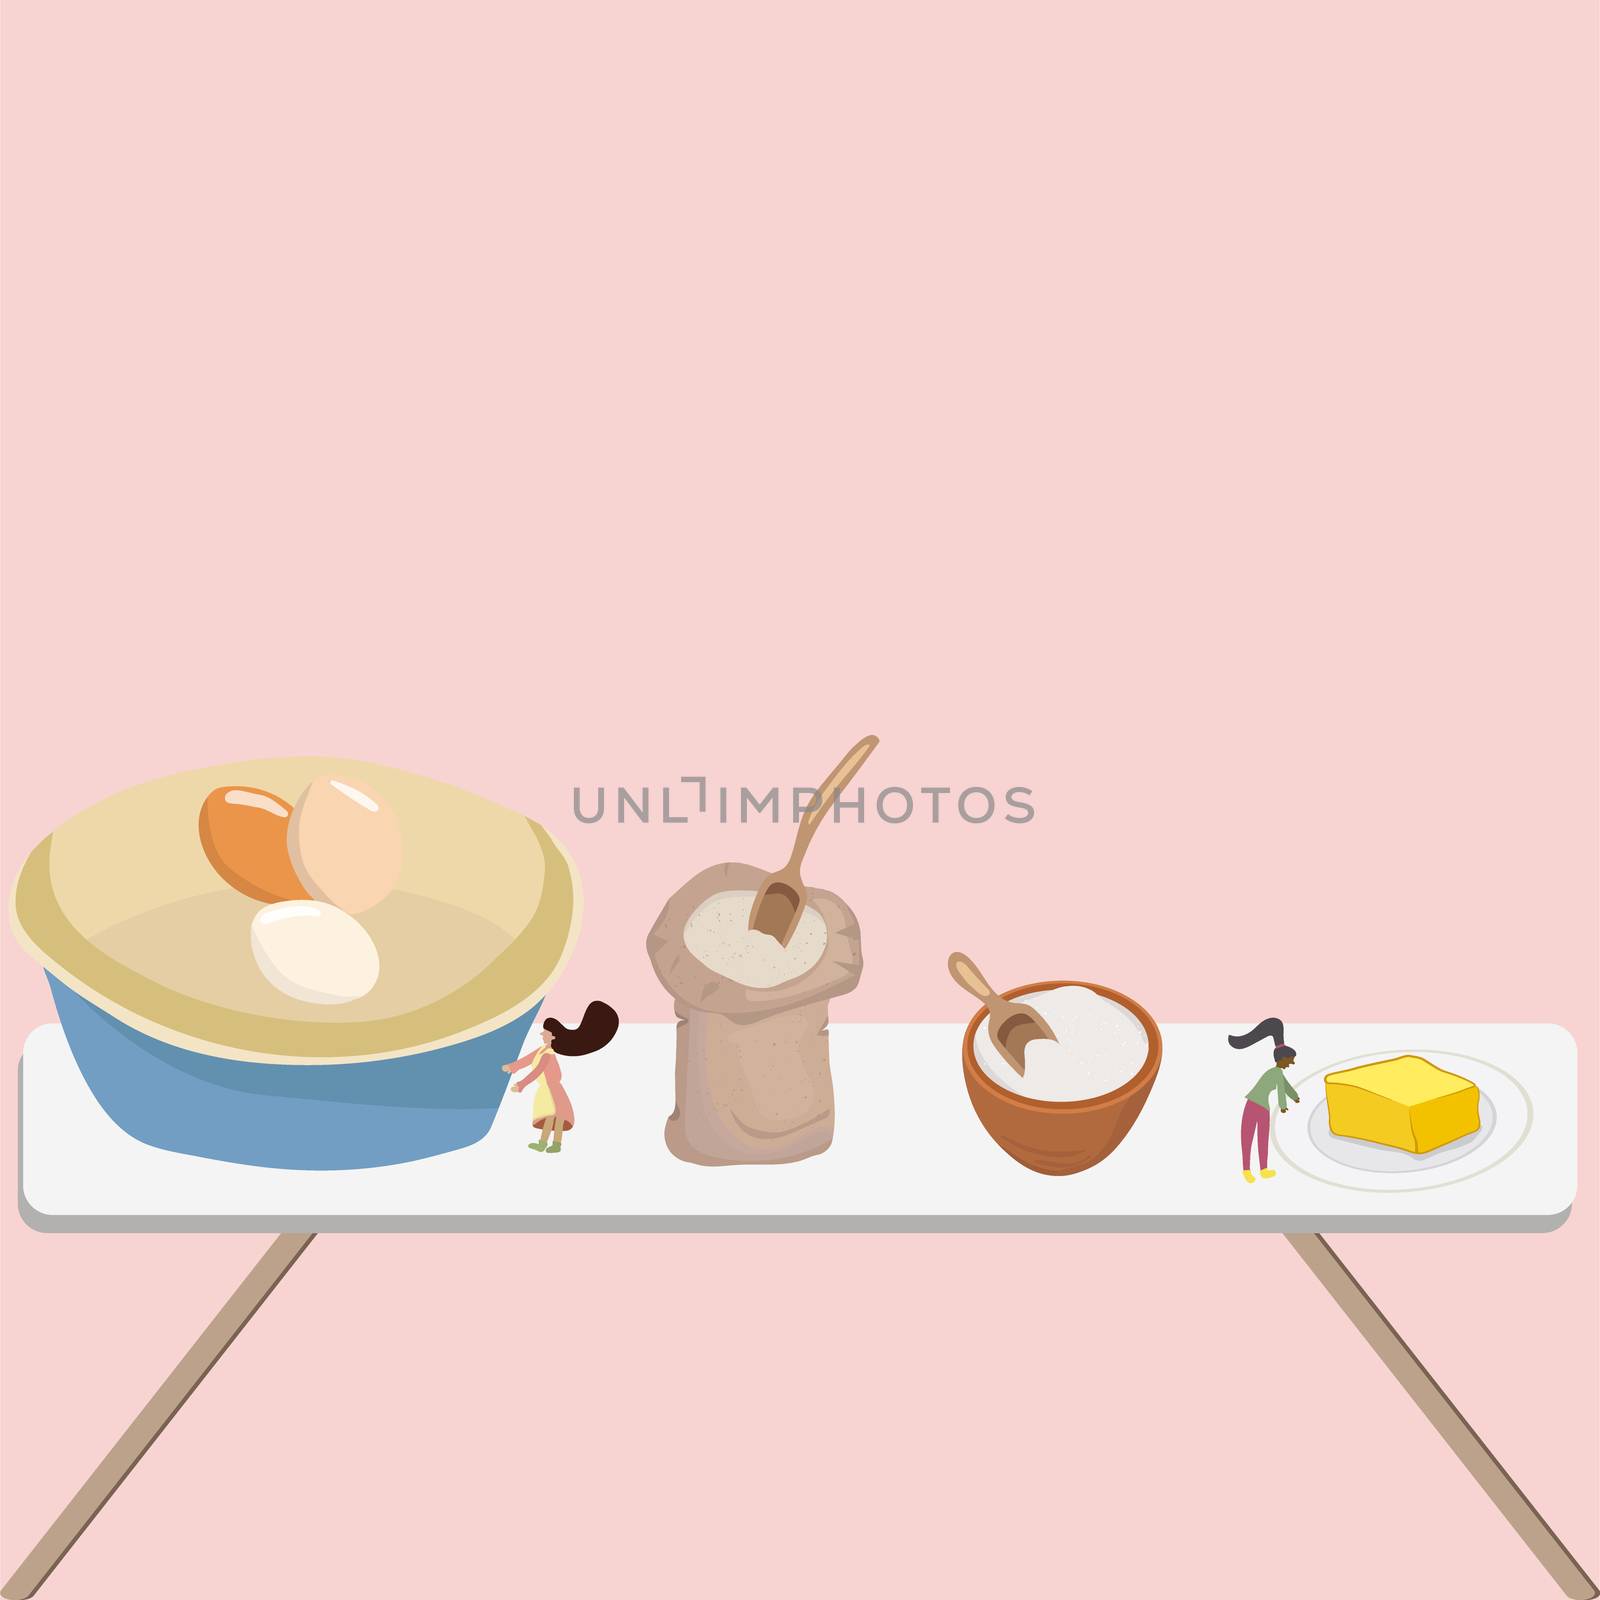 Small ladies preparing ingredients for baking on the kitchen table. Cute vector illustration.